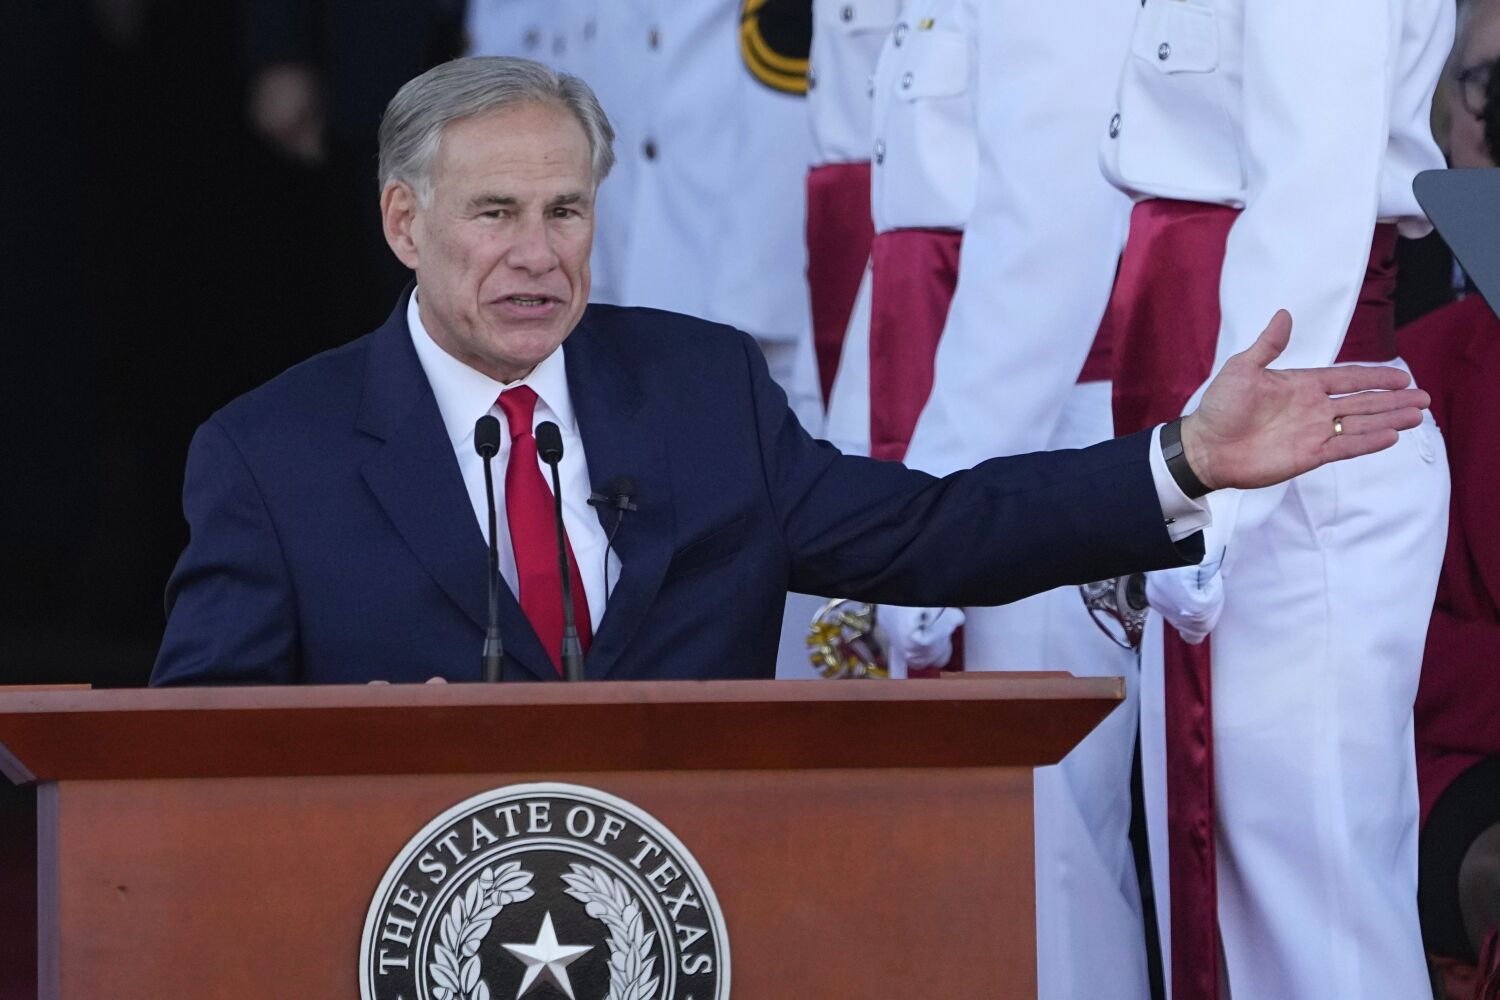 Granderson: With each horrific shooting, Texas' governor looks more inept